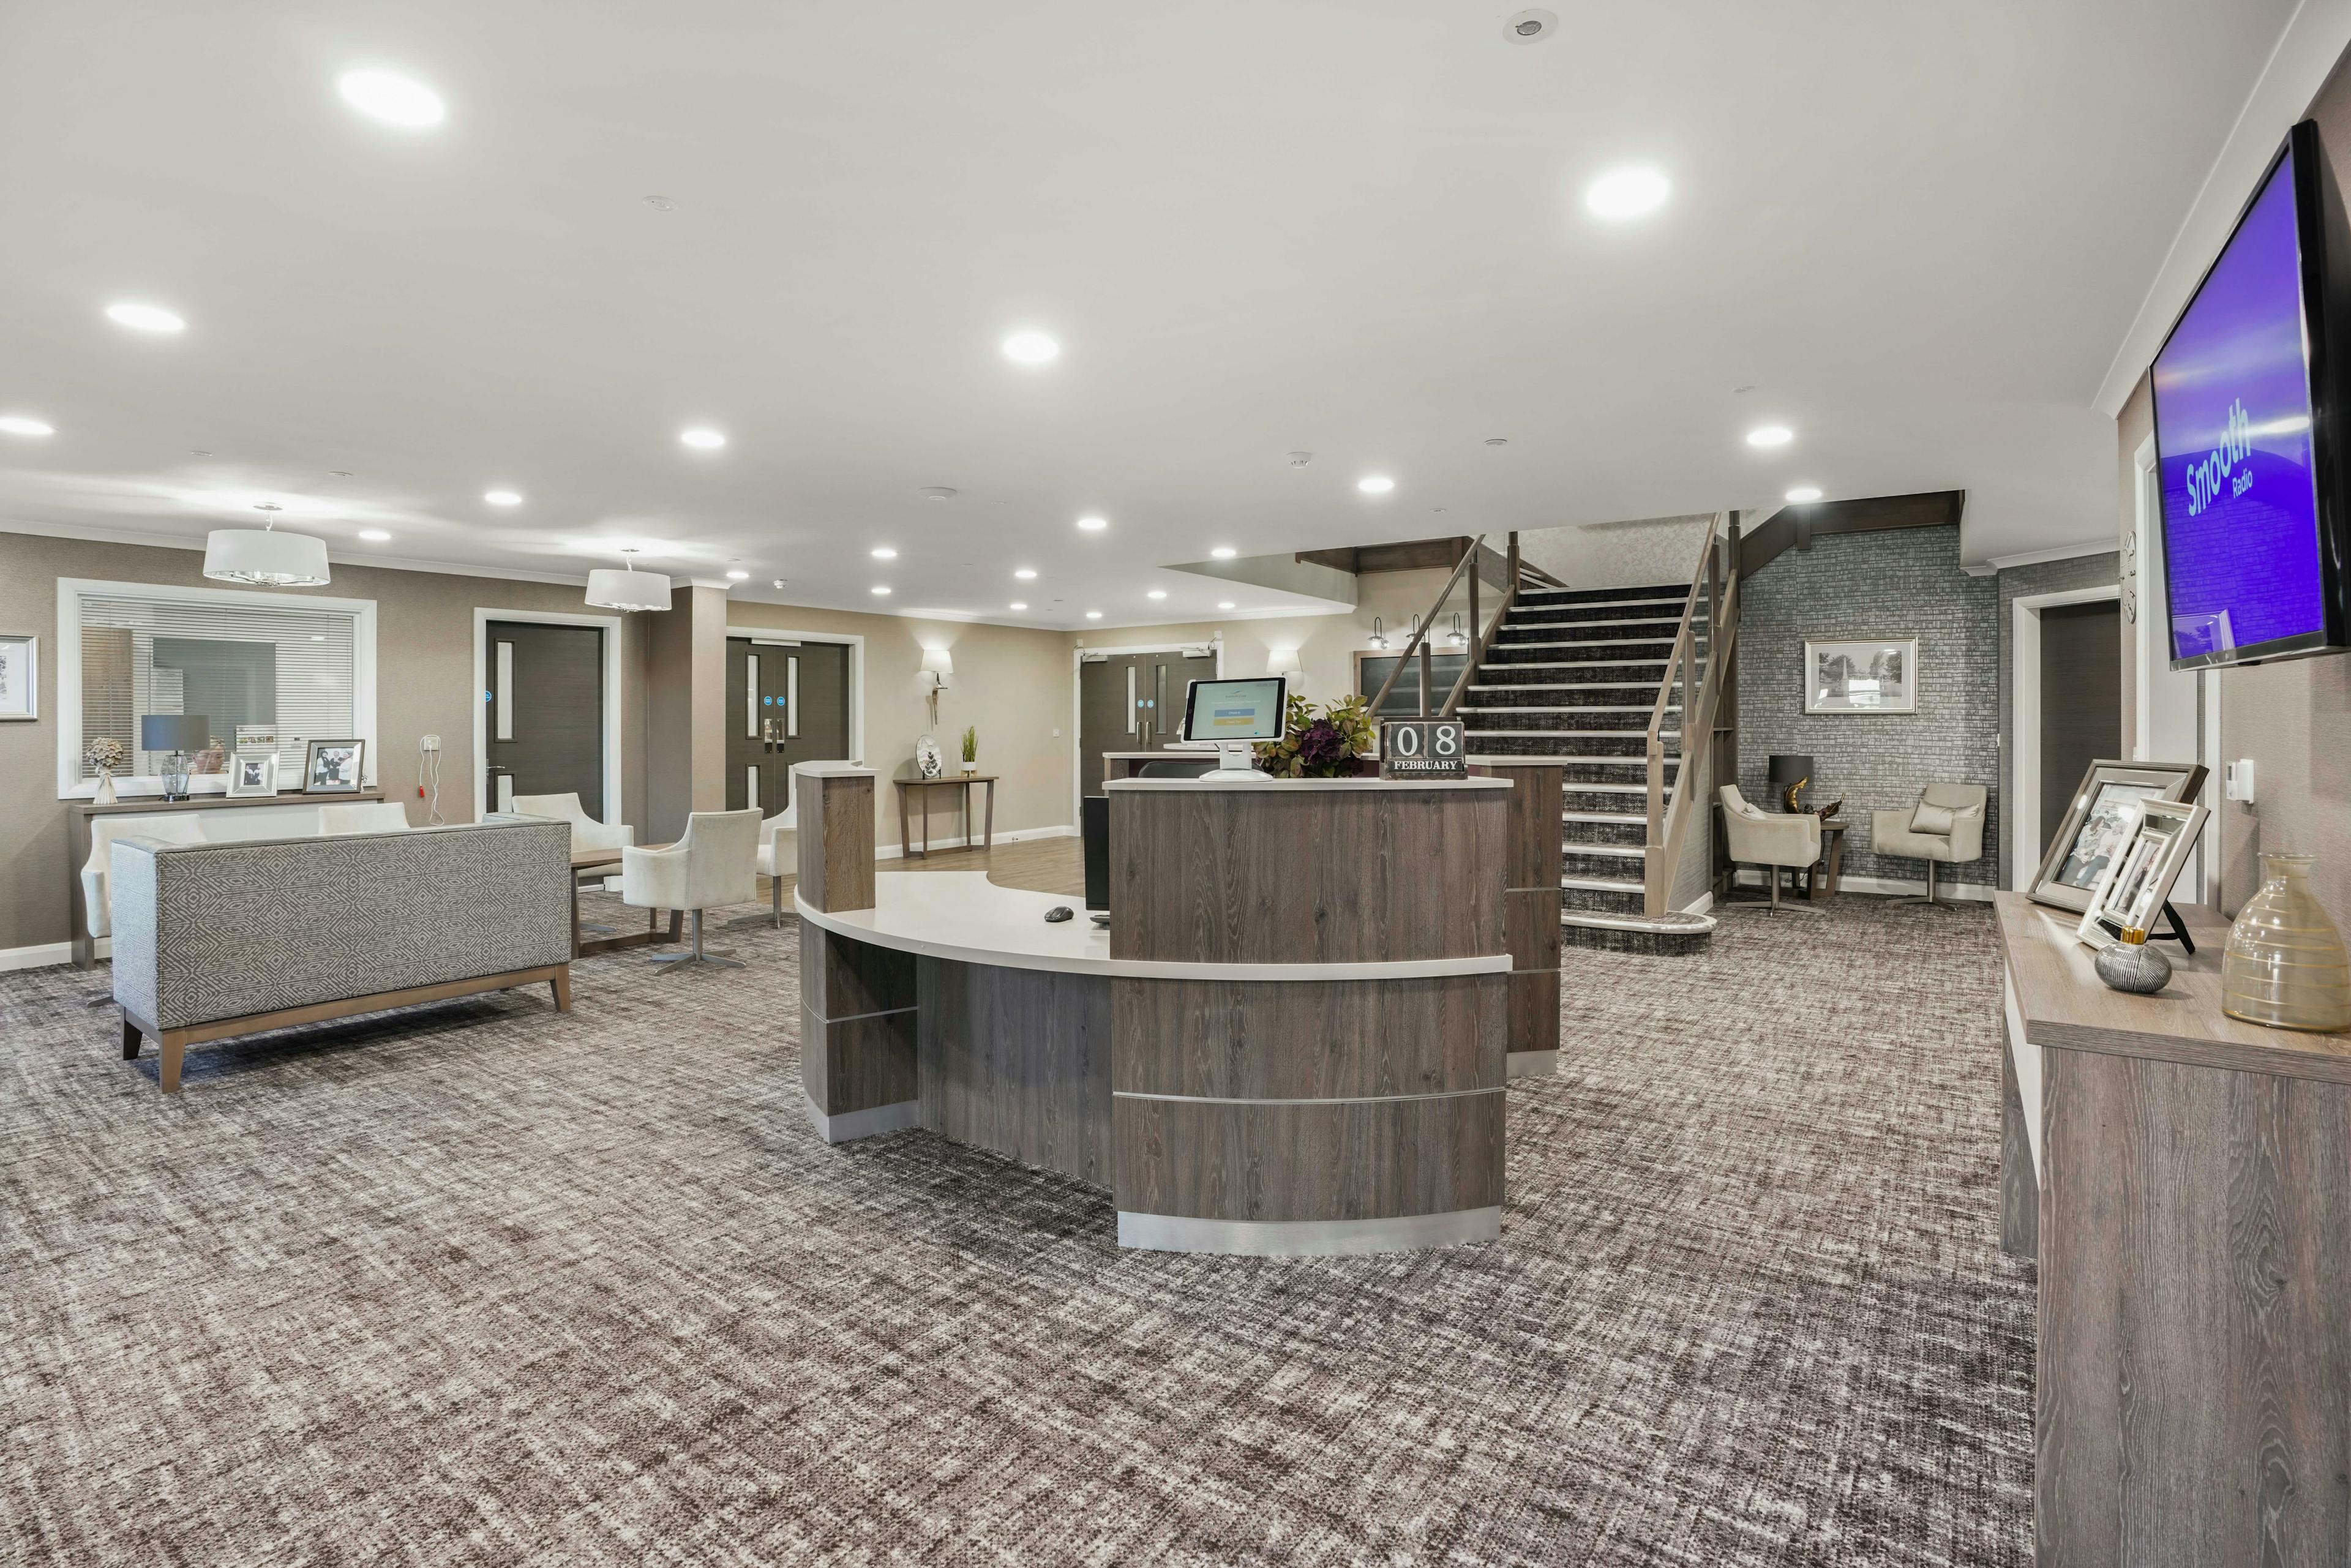 Reception of Holbeach Meadow care home in Holbeach, Lincolnshire